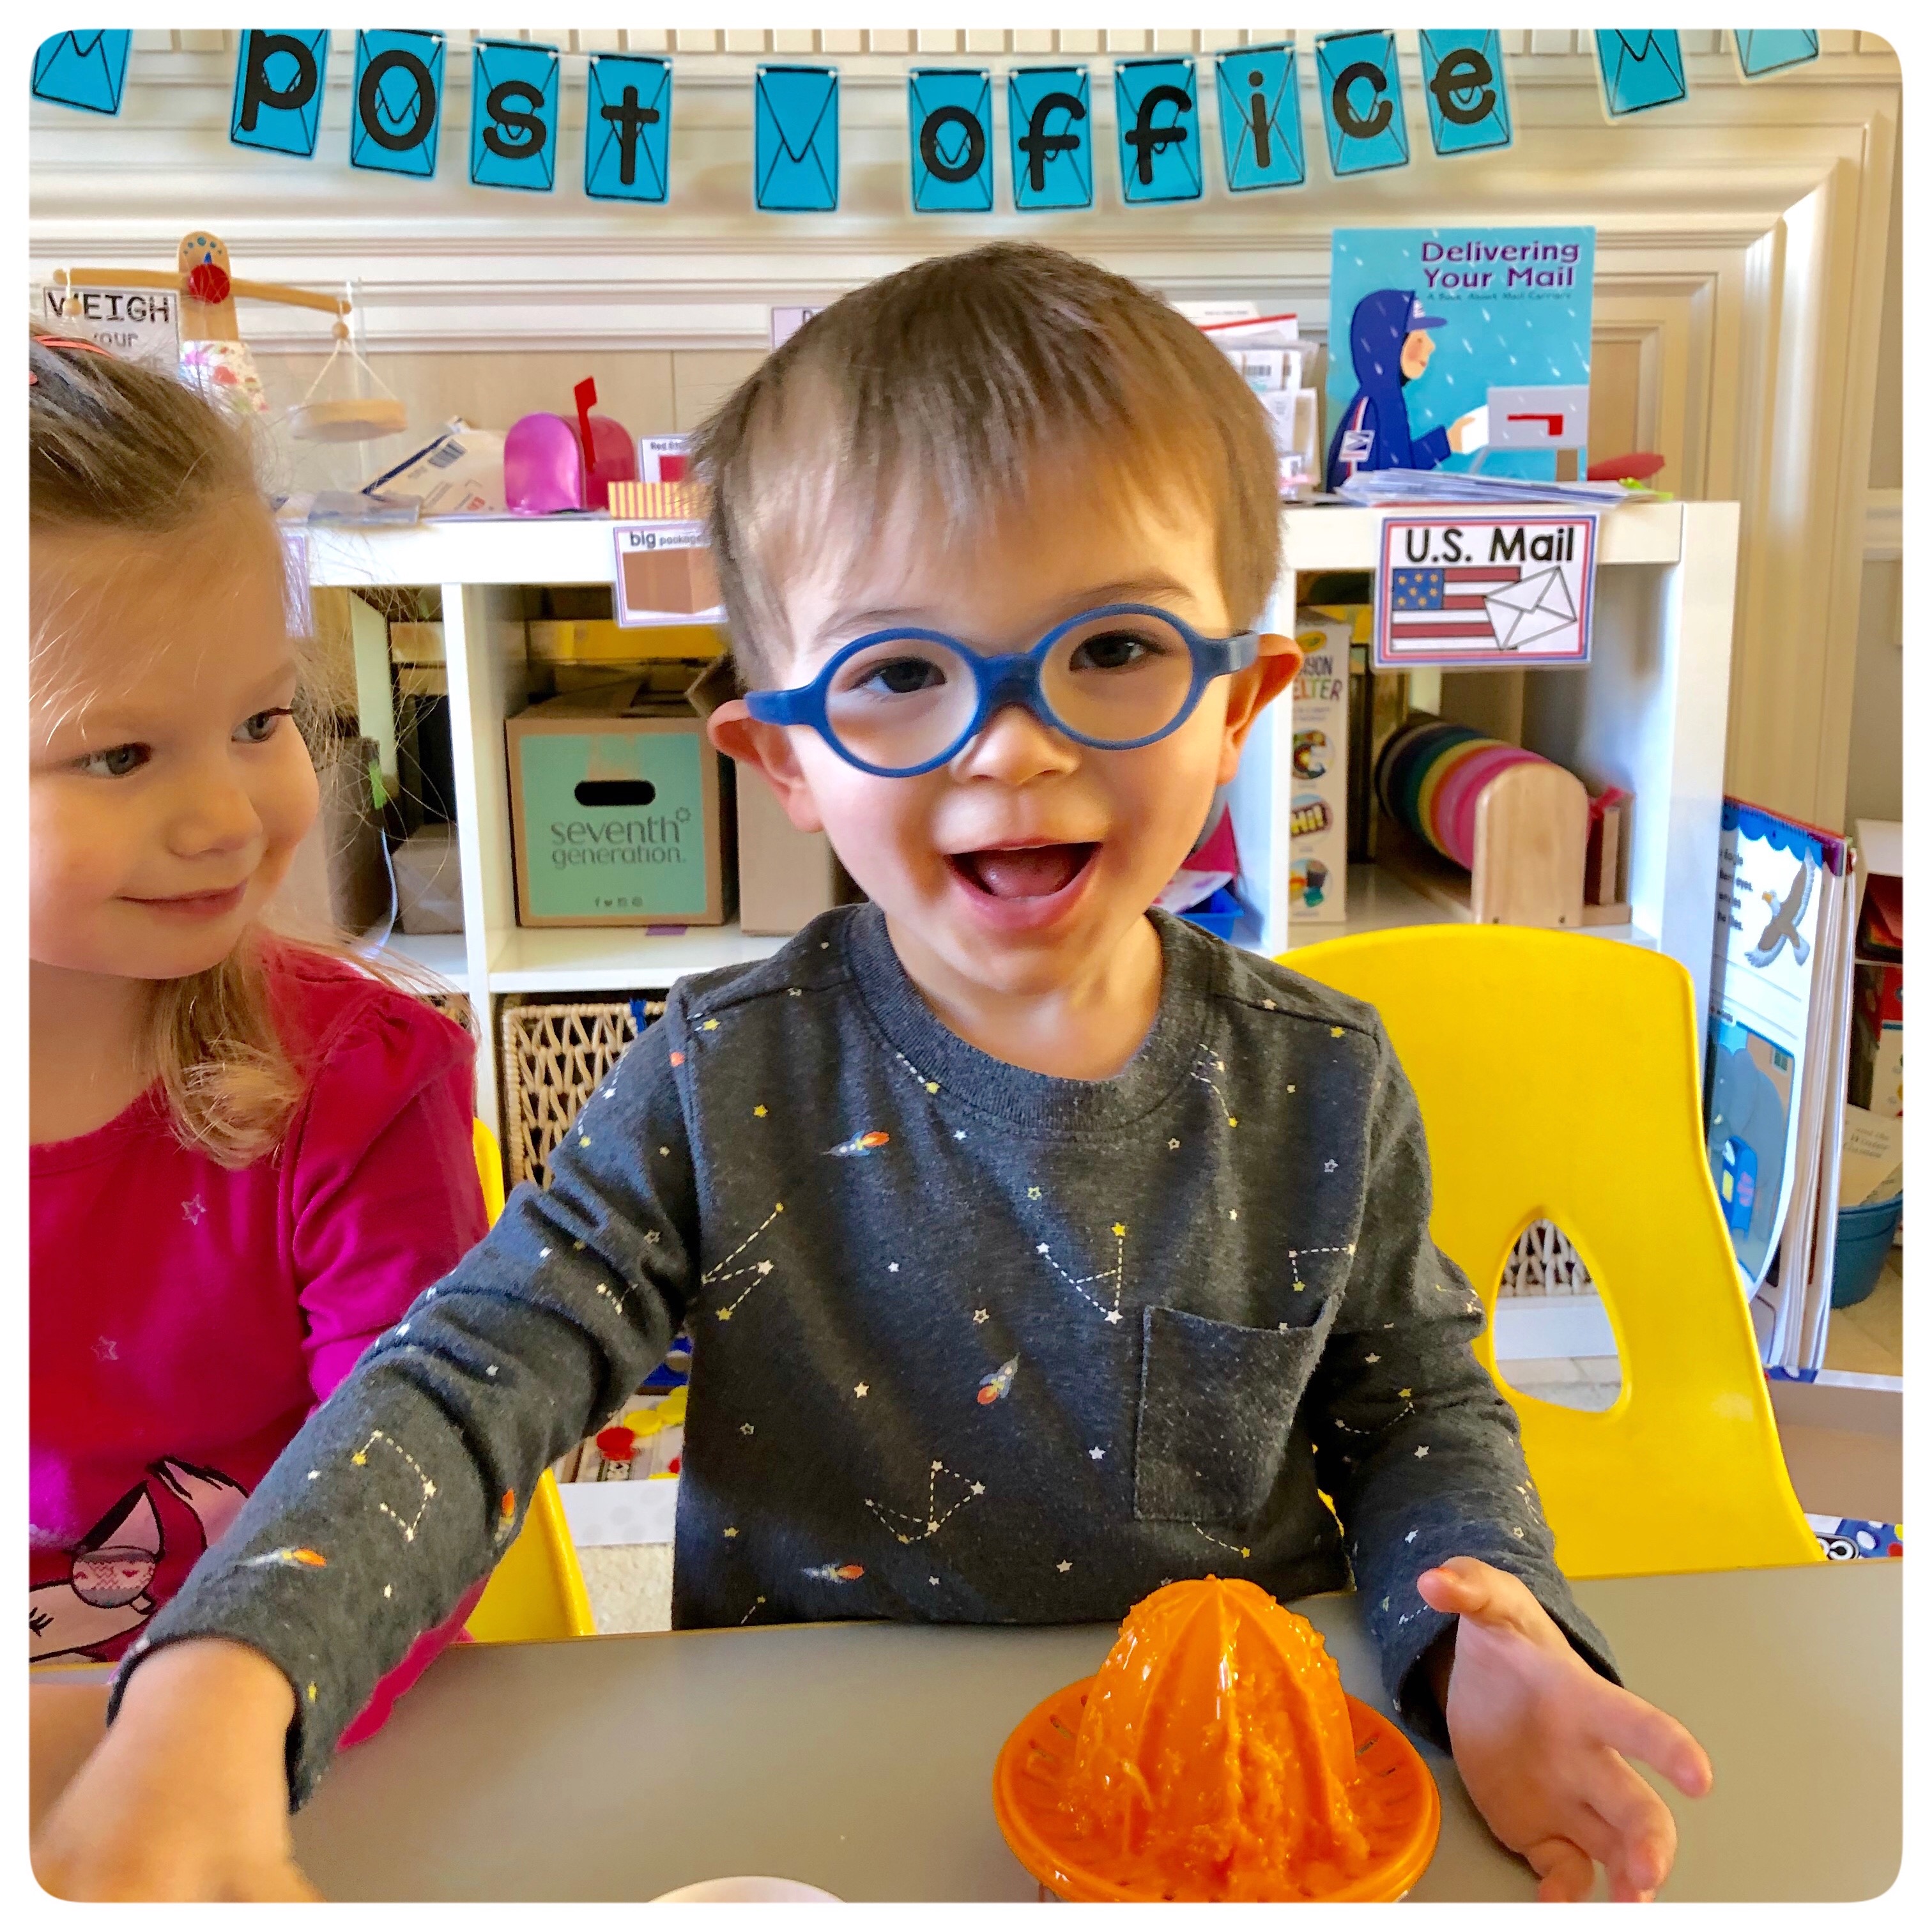 🍊Orange Juice kind of day🍊 .What better way to incorporate sensory play, learning life skills, and snack time than to create your very own Orange Juice! . Look how proud they are! 💞 Makes my heart happy how they care for each other